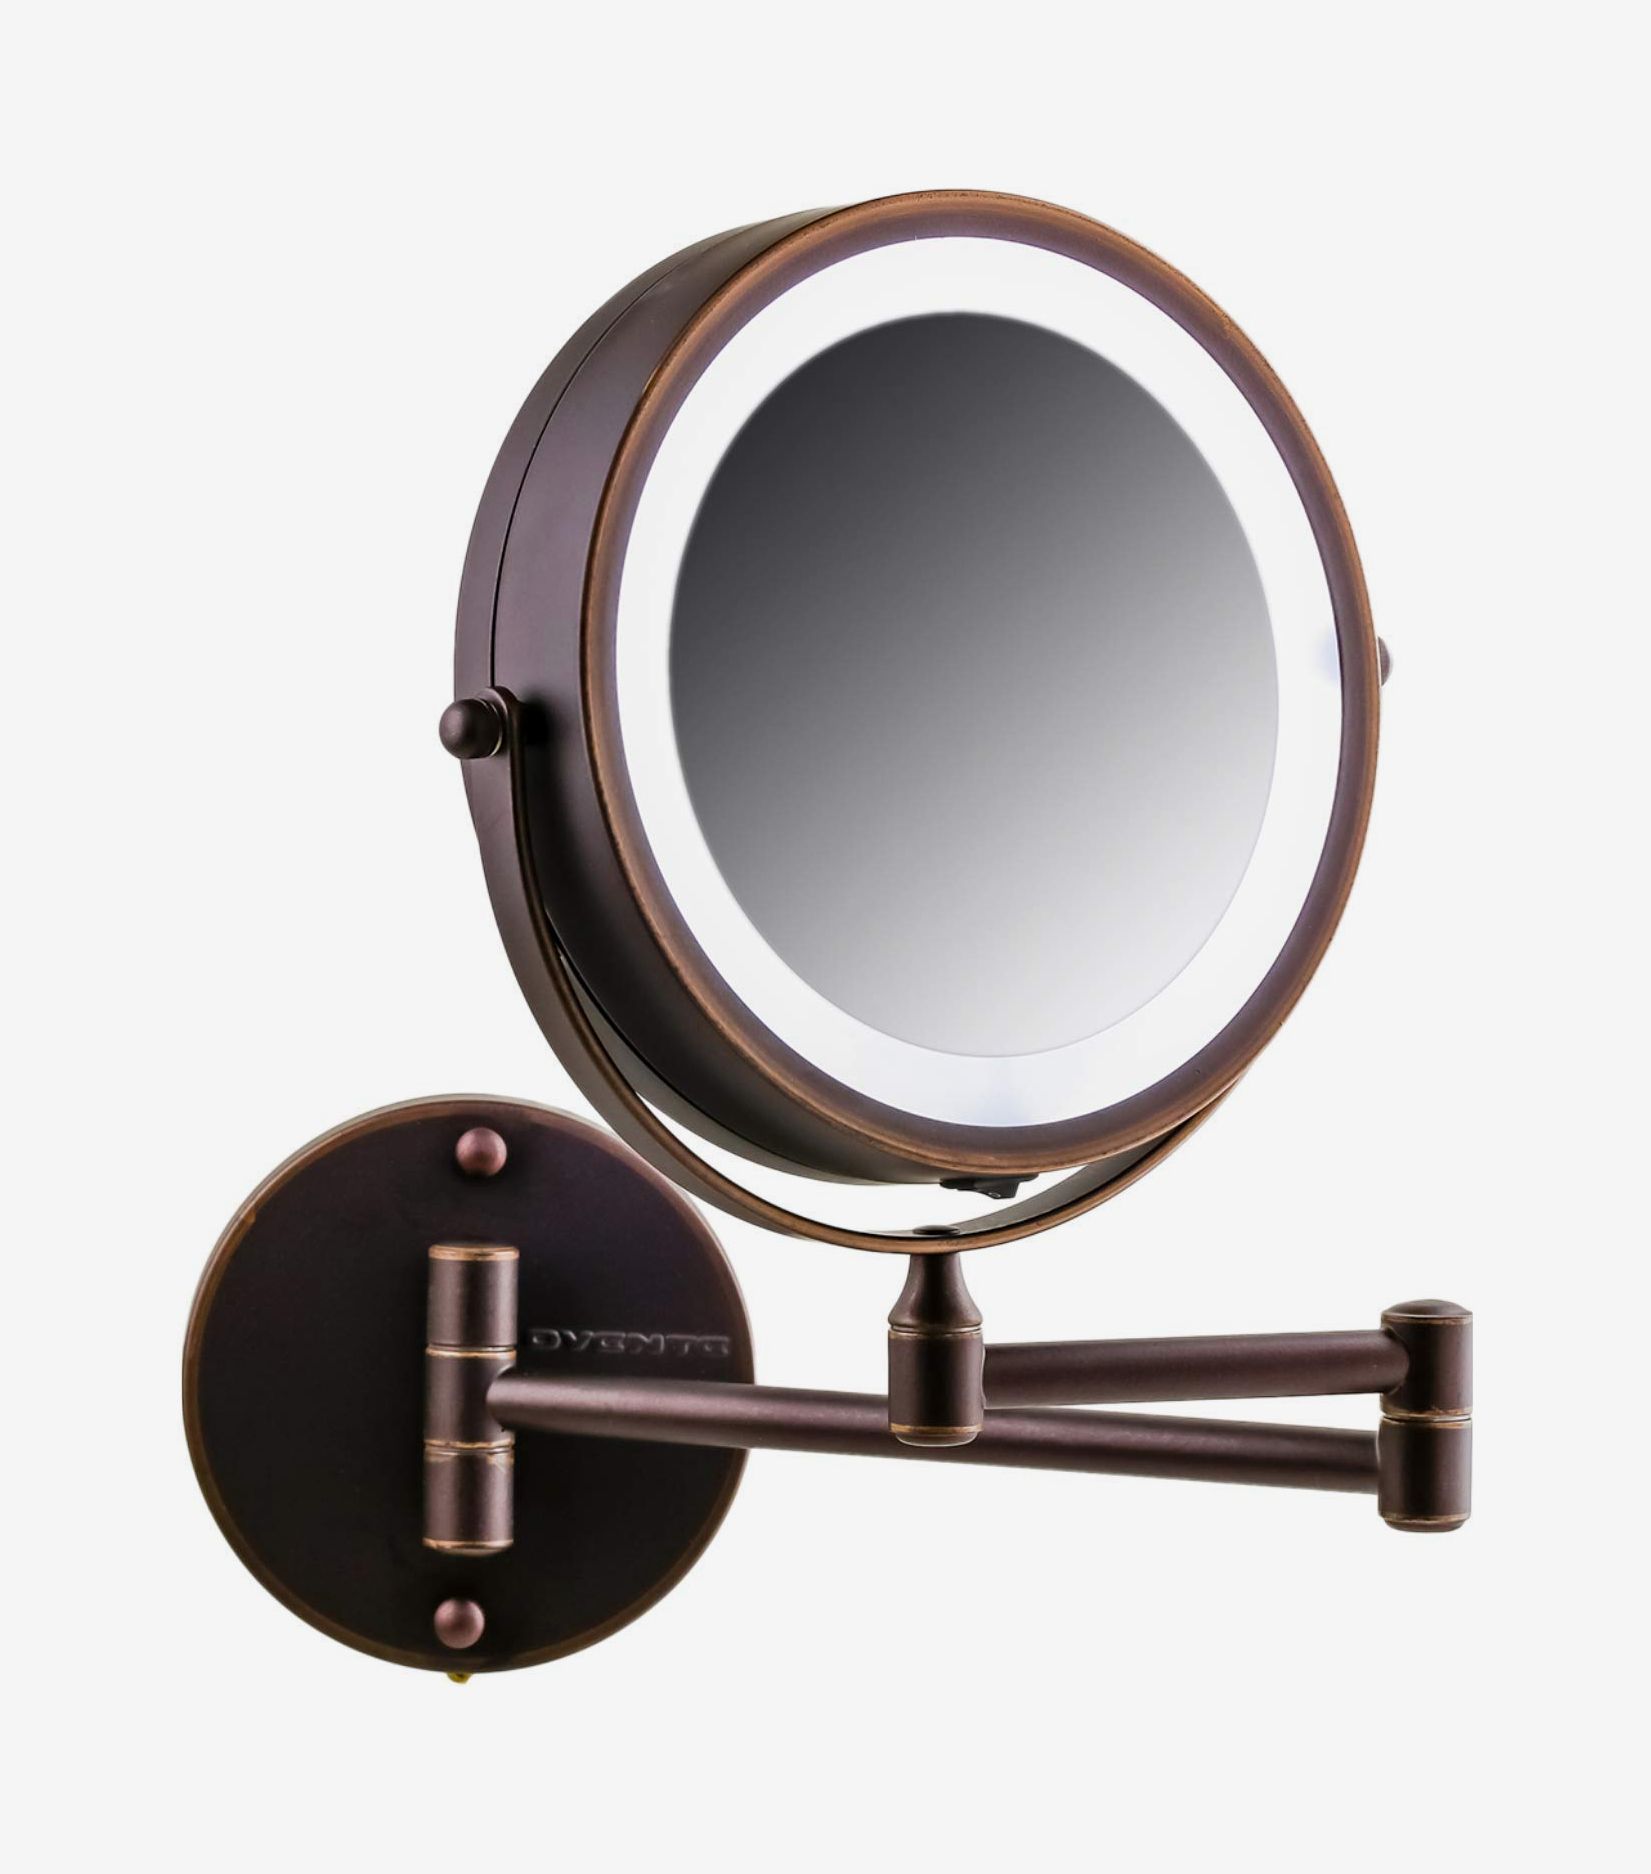 14 Best Lighted Makeup Mirrors 2021, Best Wall Mounted Lighted Make Up Mirror